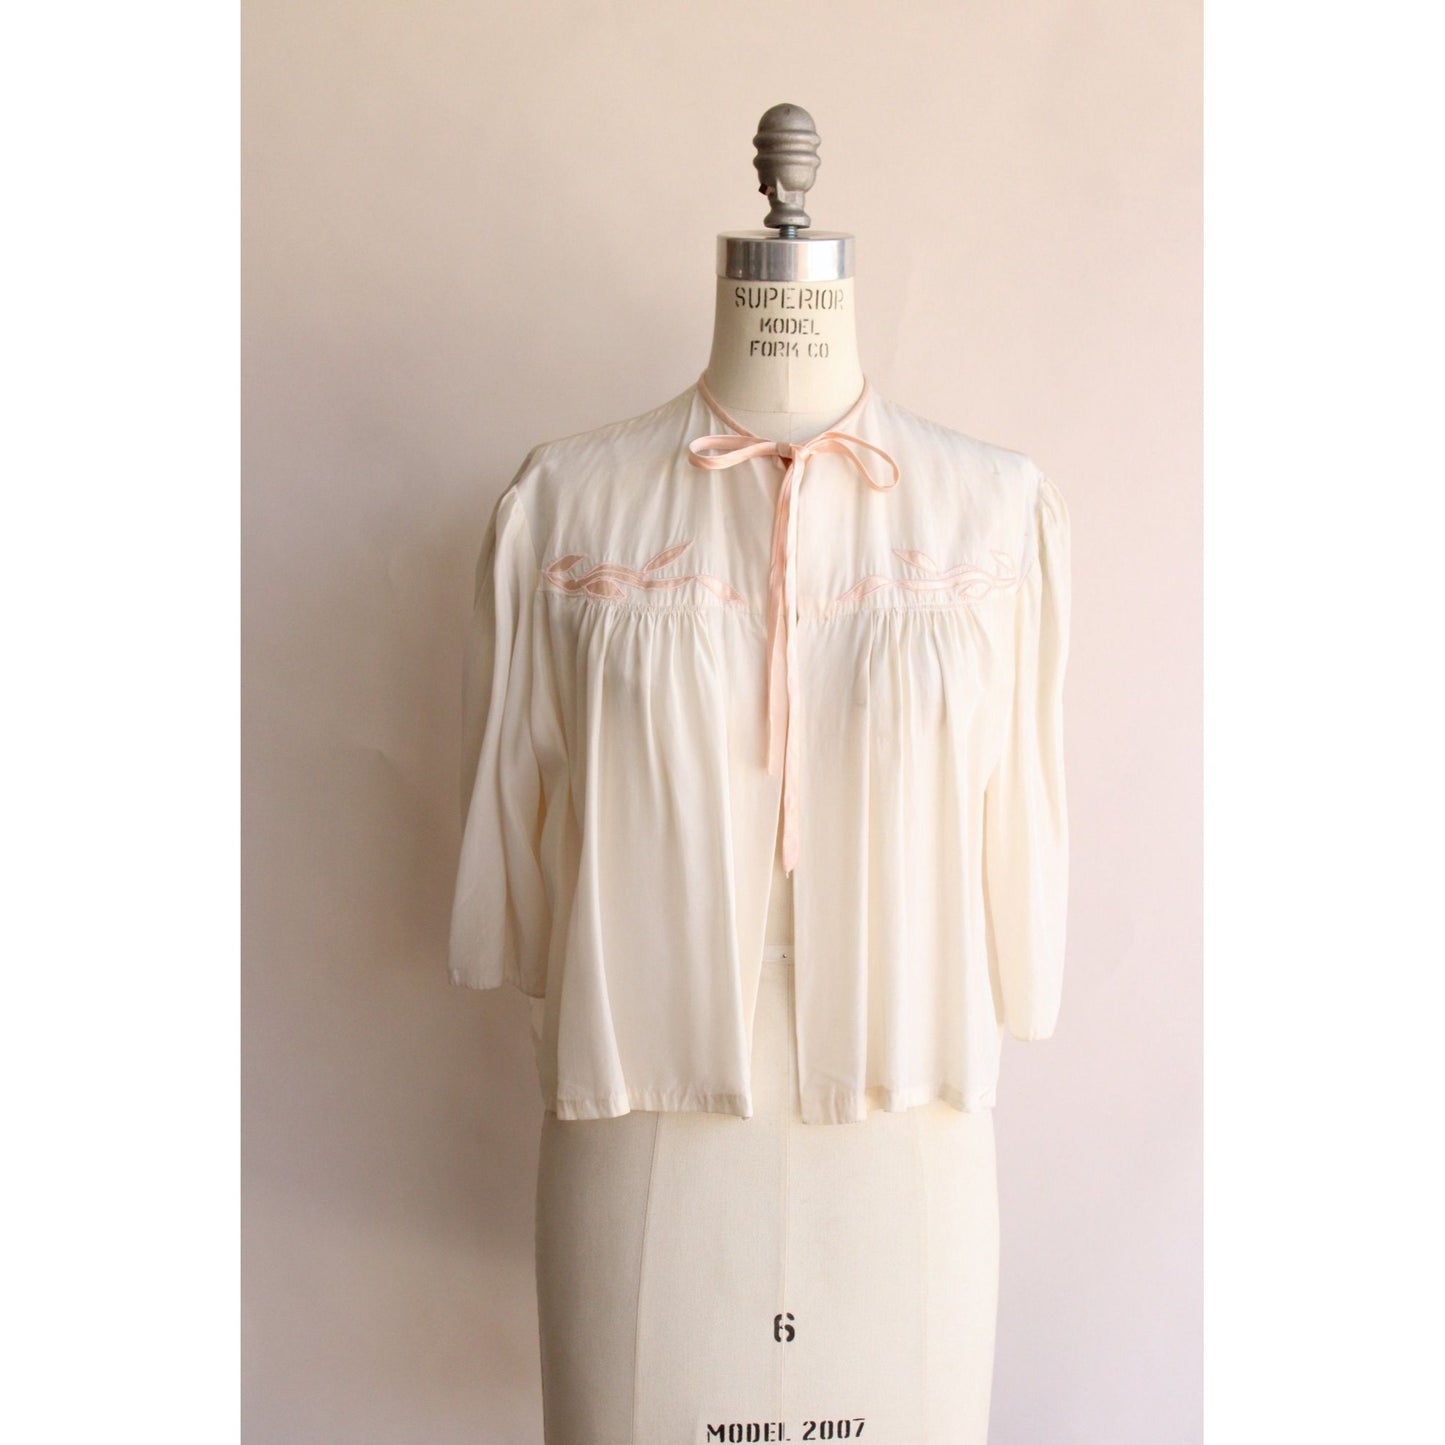 Vintage 1940s Bed Jacket in White Rayon with Pink Satin Trim